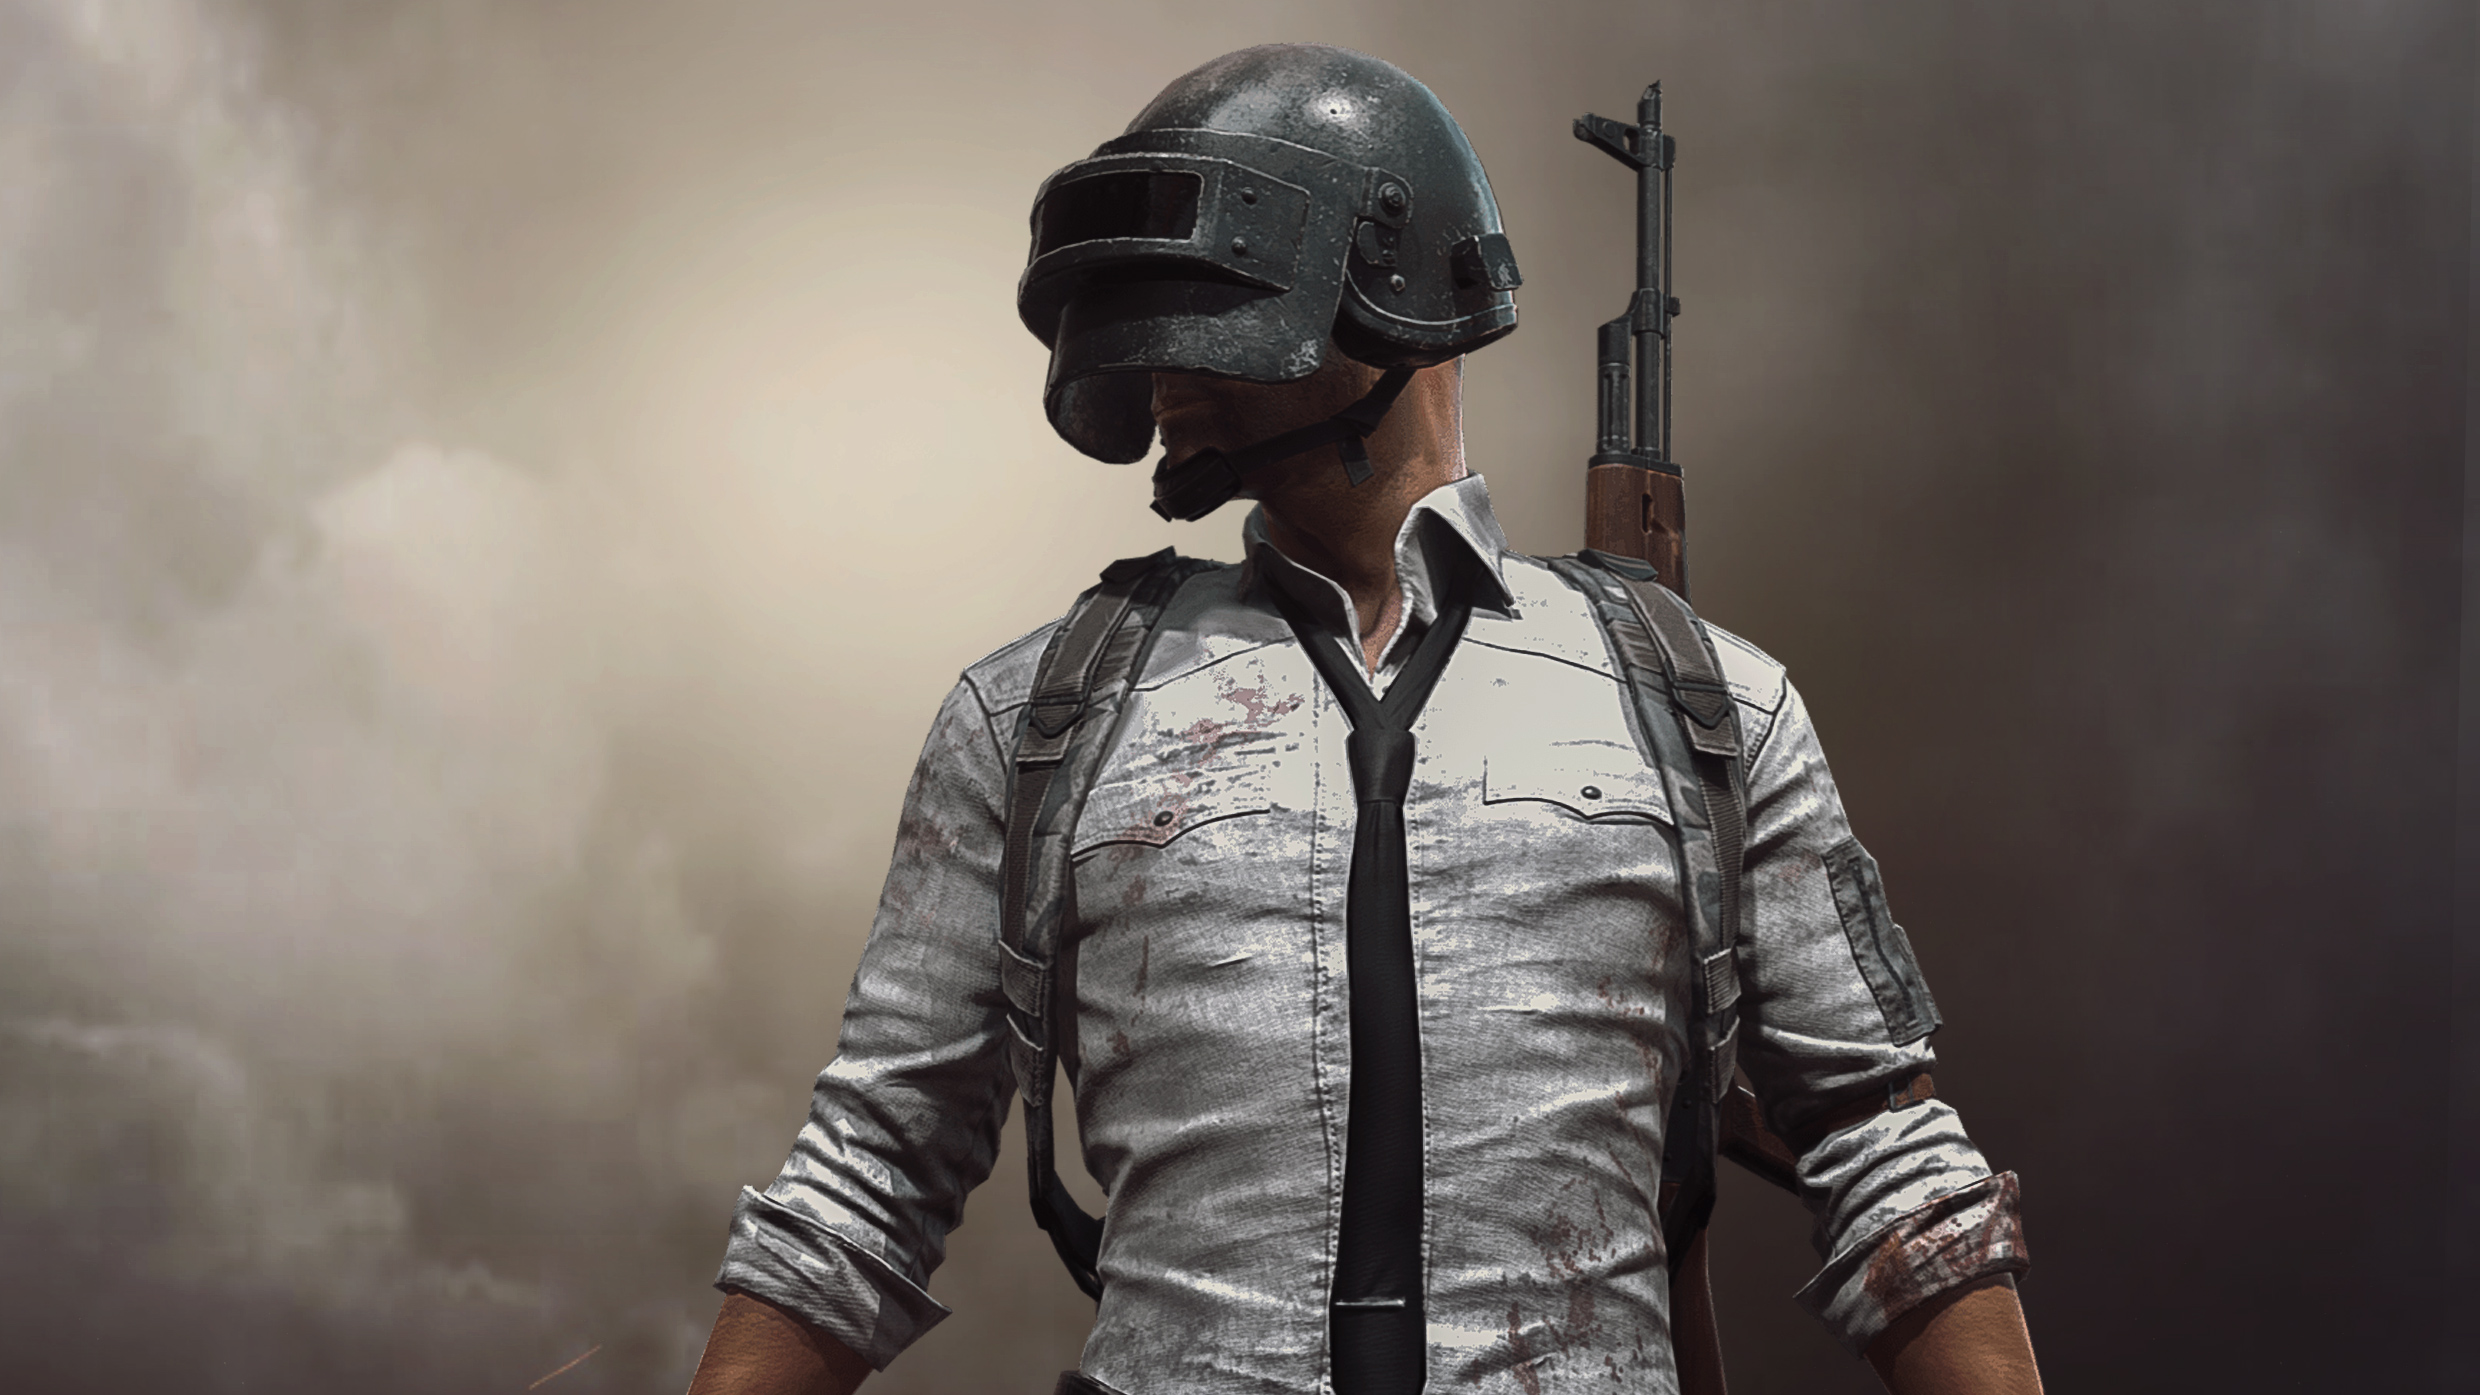 Tons of awesome pubg wallpapers to download for free. 